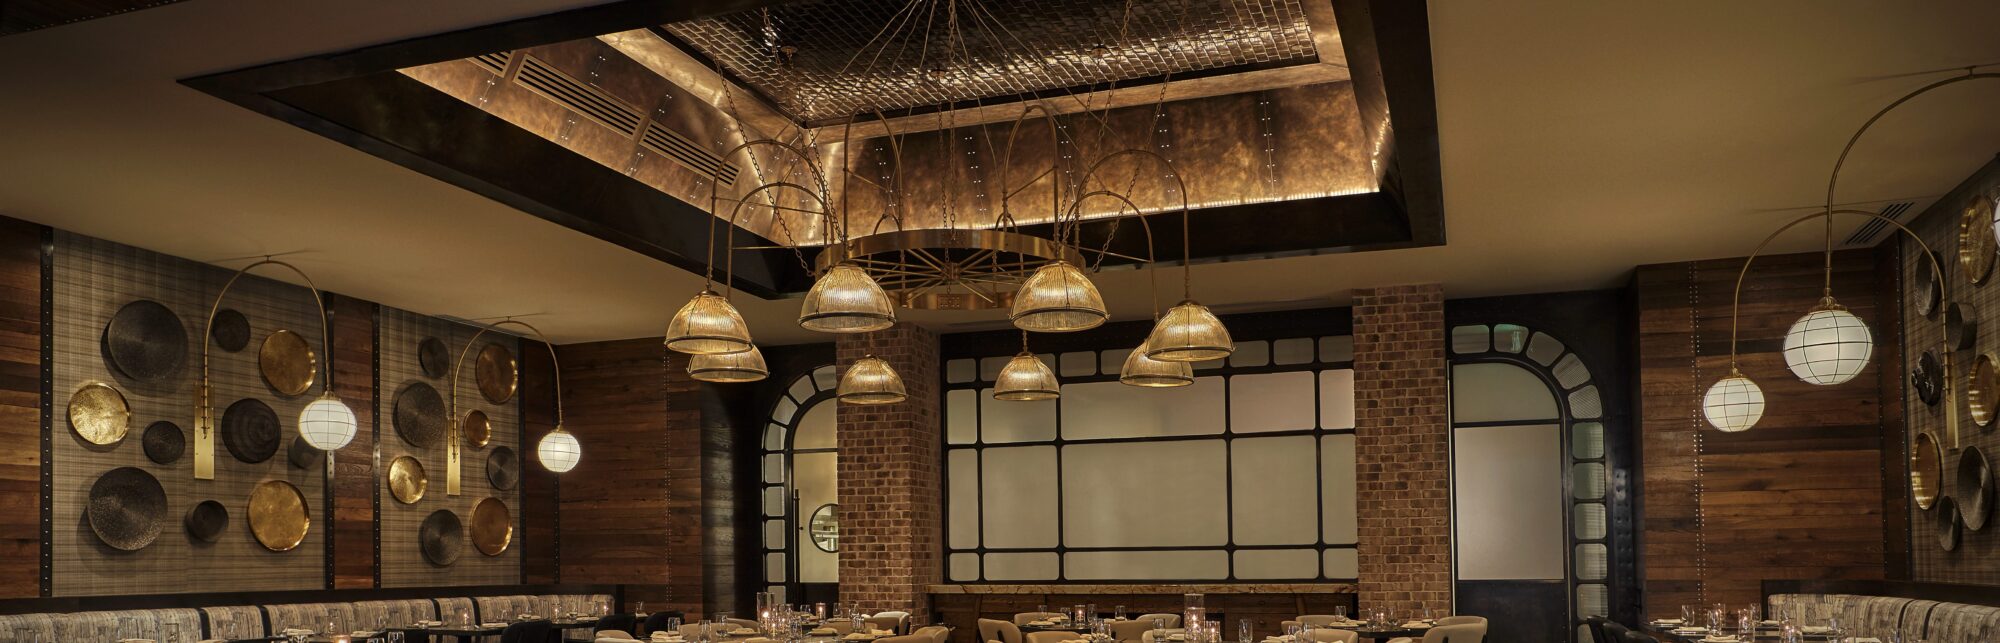 Glenn Rieder provided high end millwork and custom interior finishings for the Pendry Hotel.